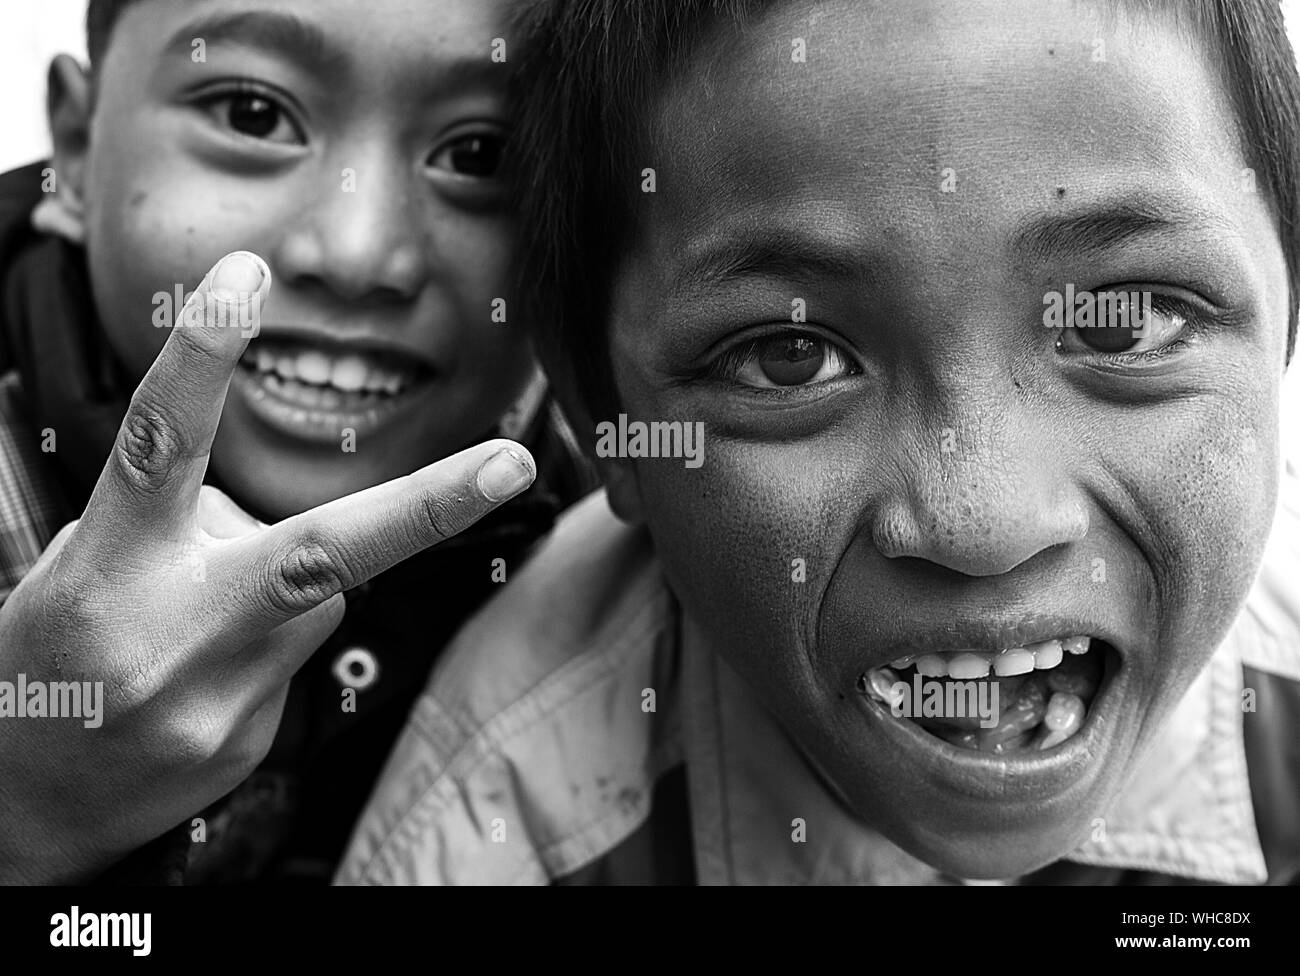 Two indian boys Black and White Stock Photos & Images - Alamy